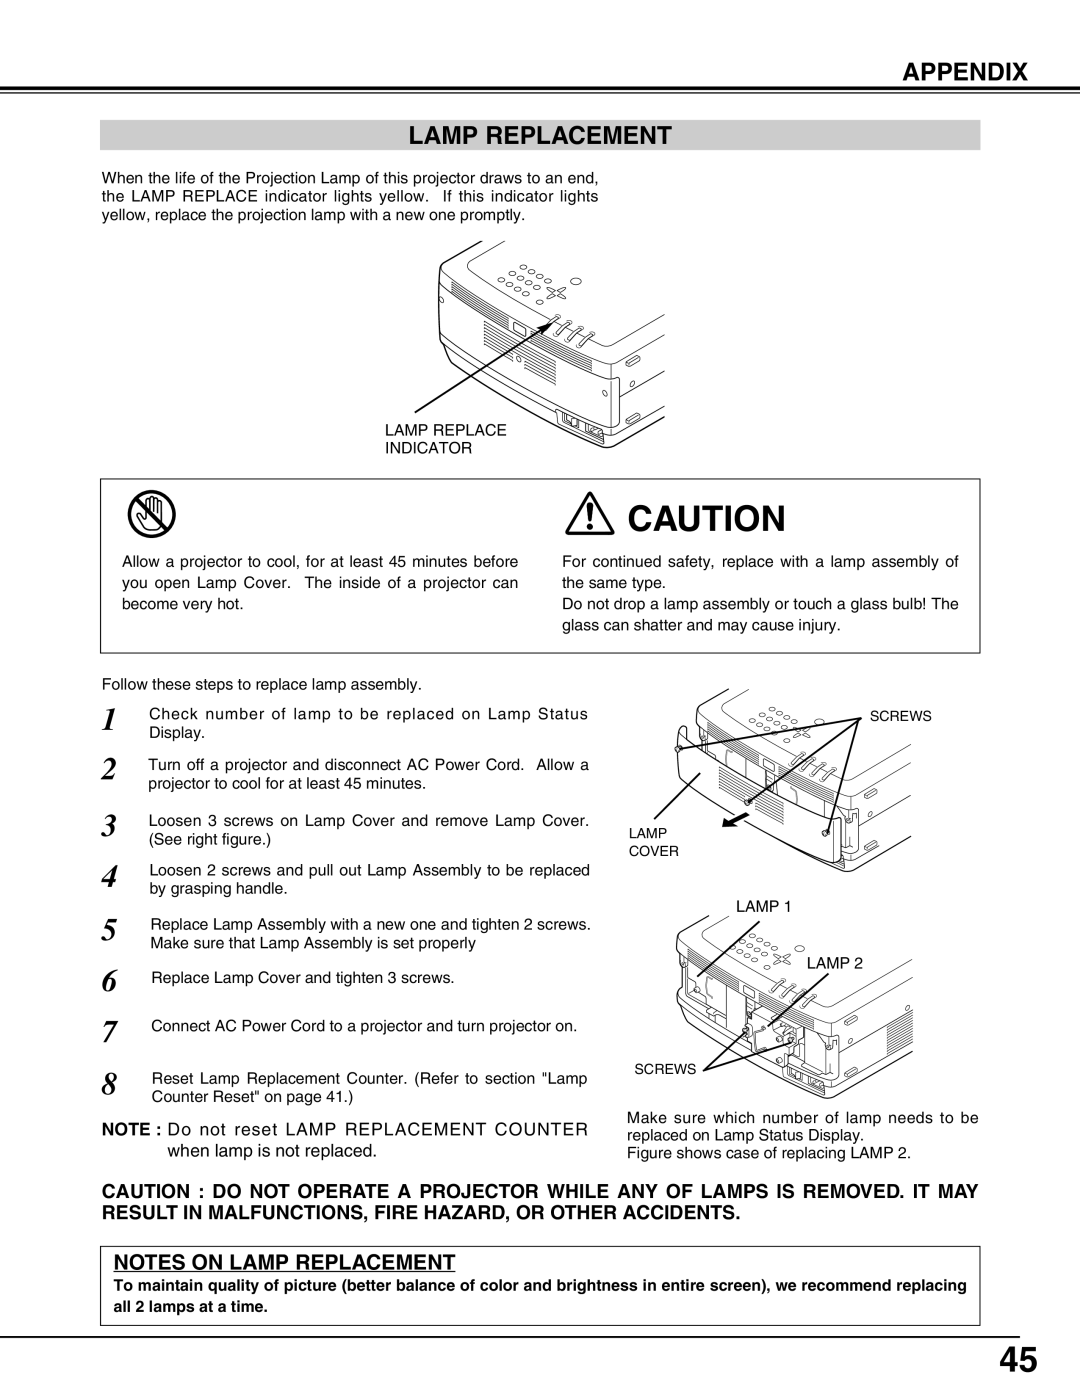 Christie Digital Systems 38-MX2001-01 user manual Appendix Lamp Replacement, Notes On Lamp Replacement 